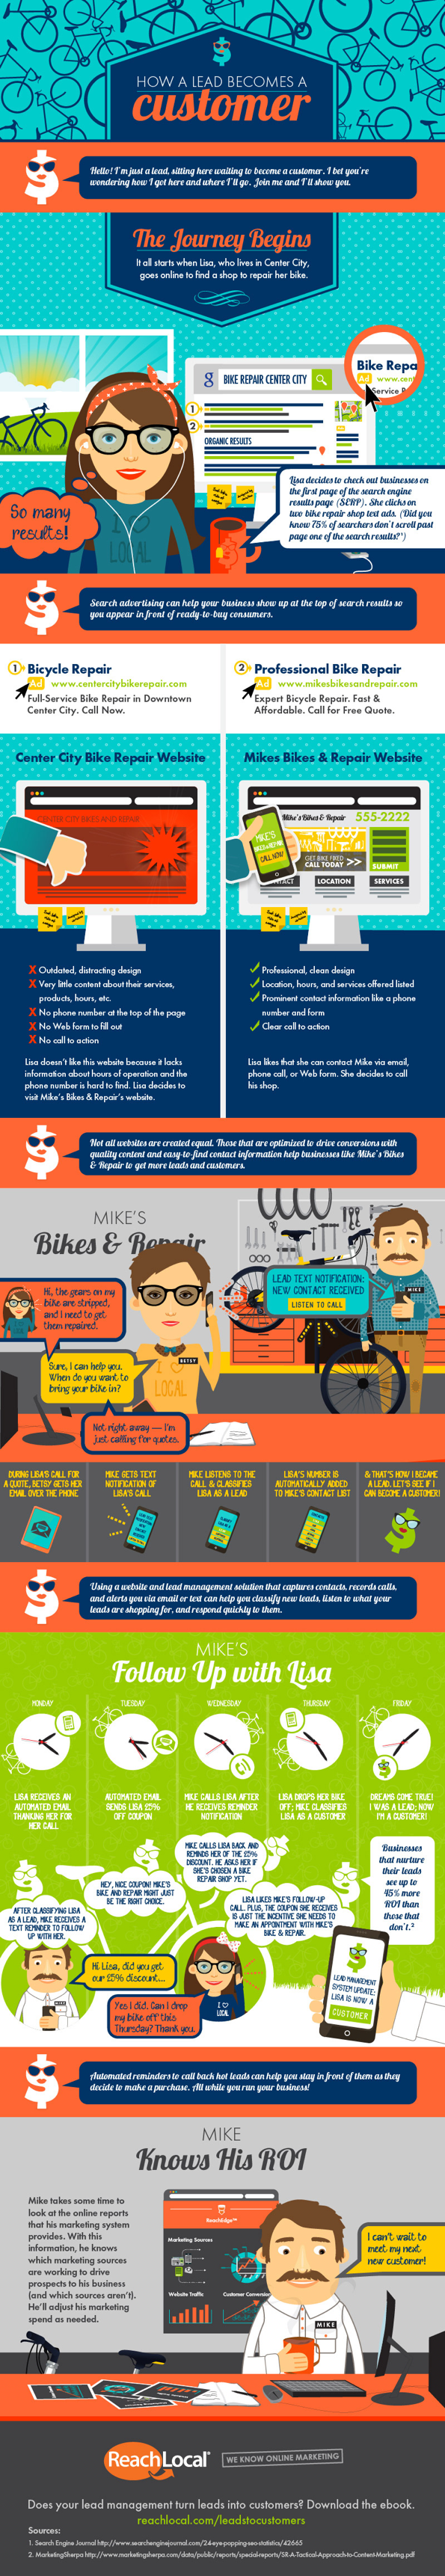 how-a-lead-becomes-a-customer-infographic